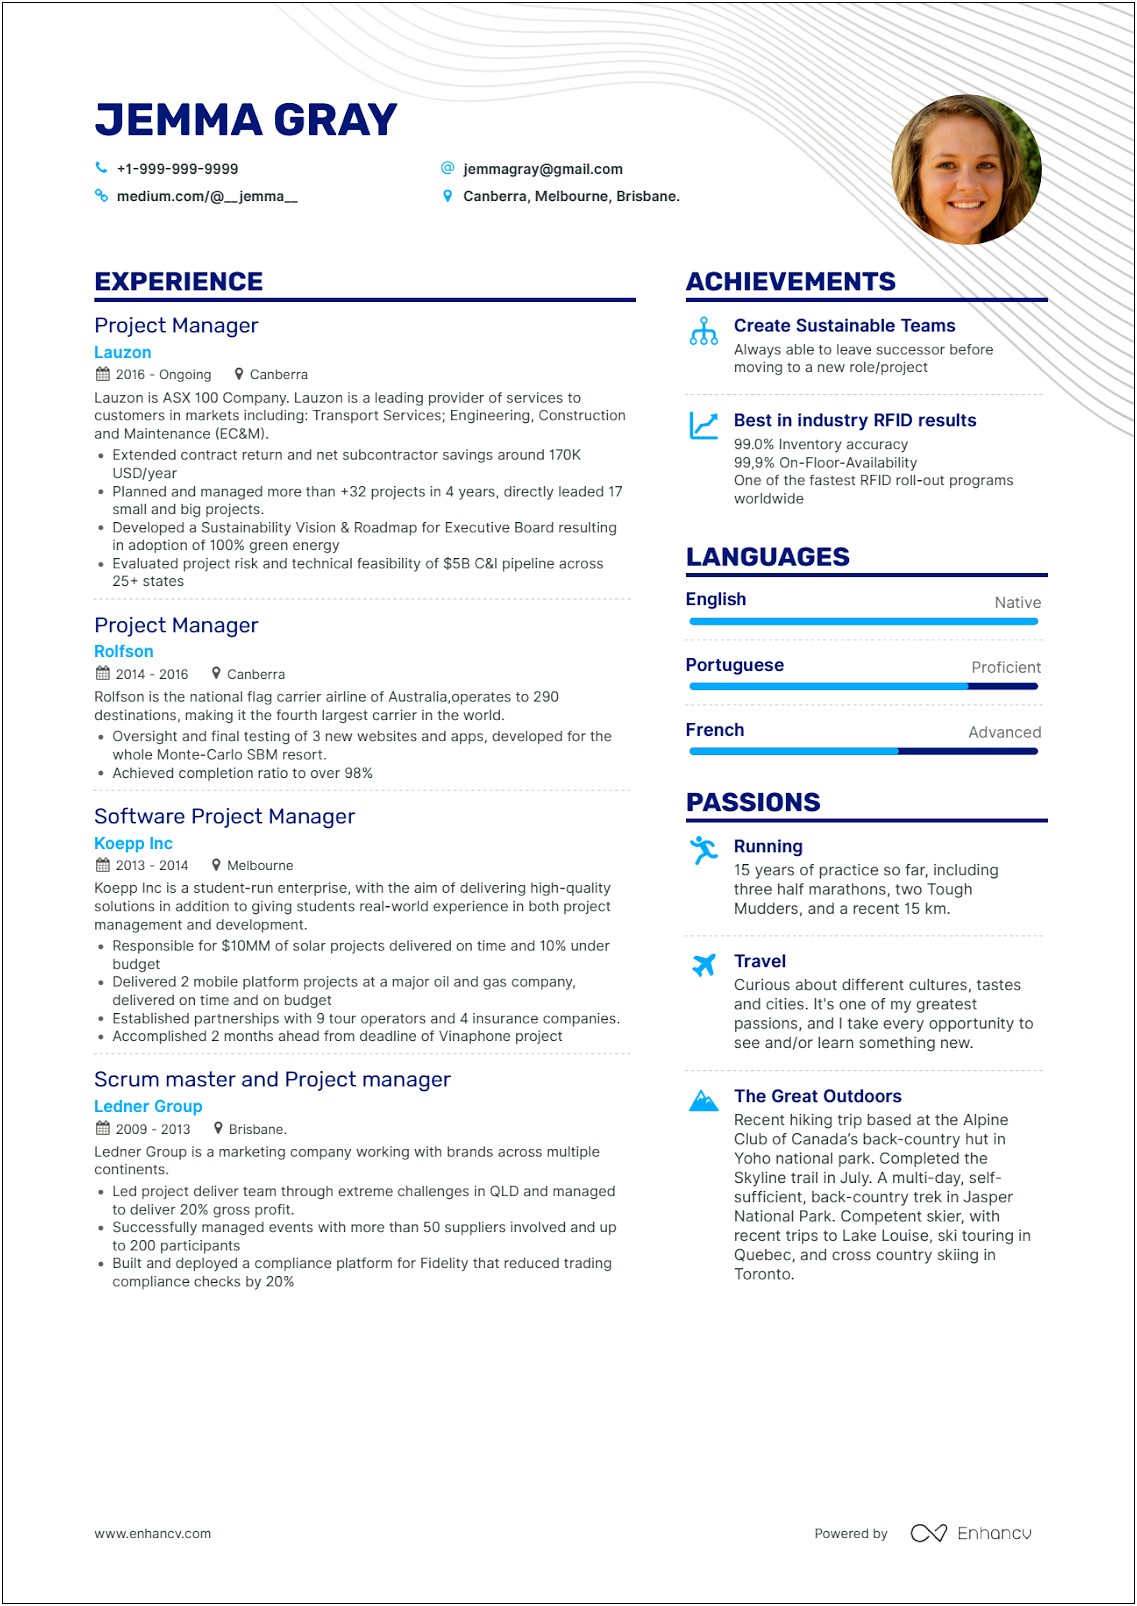 Good Accent Font For Name On Resume